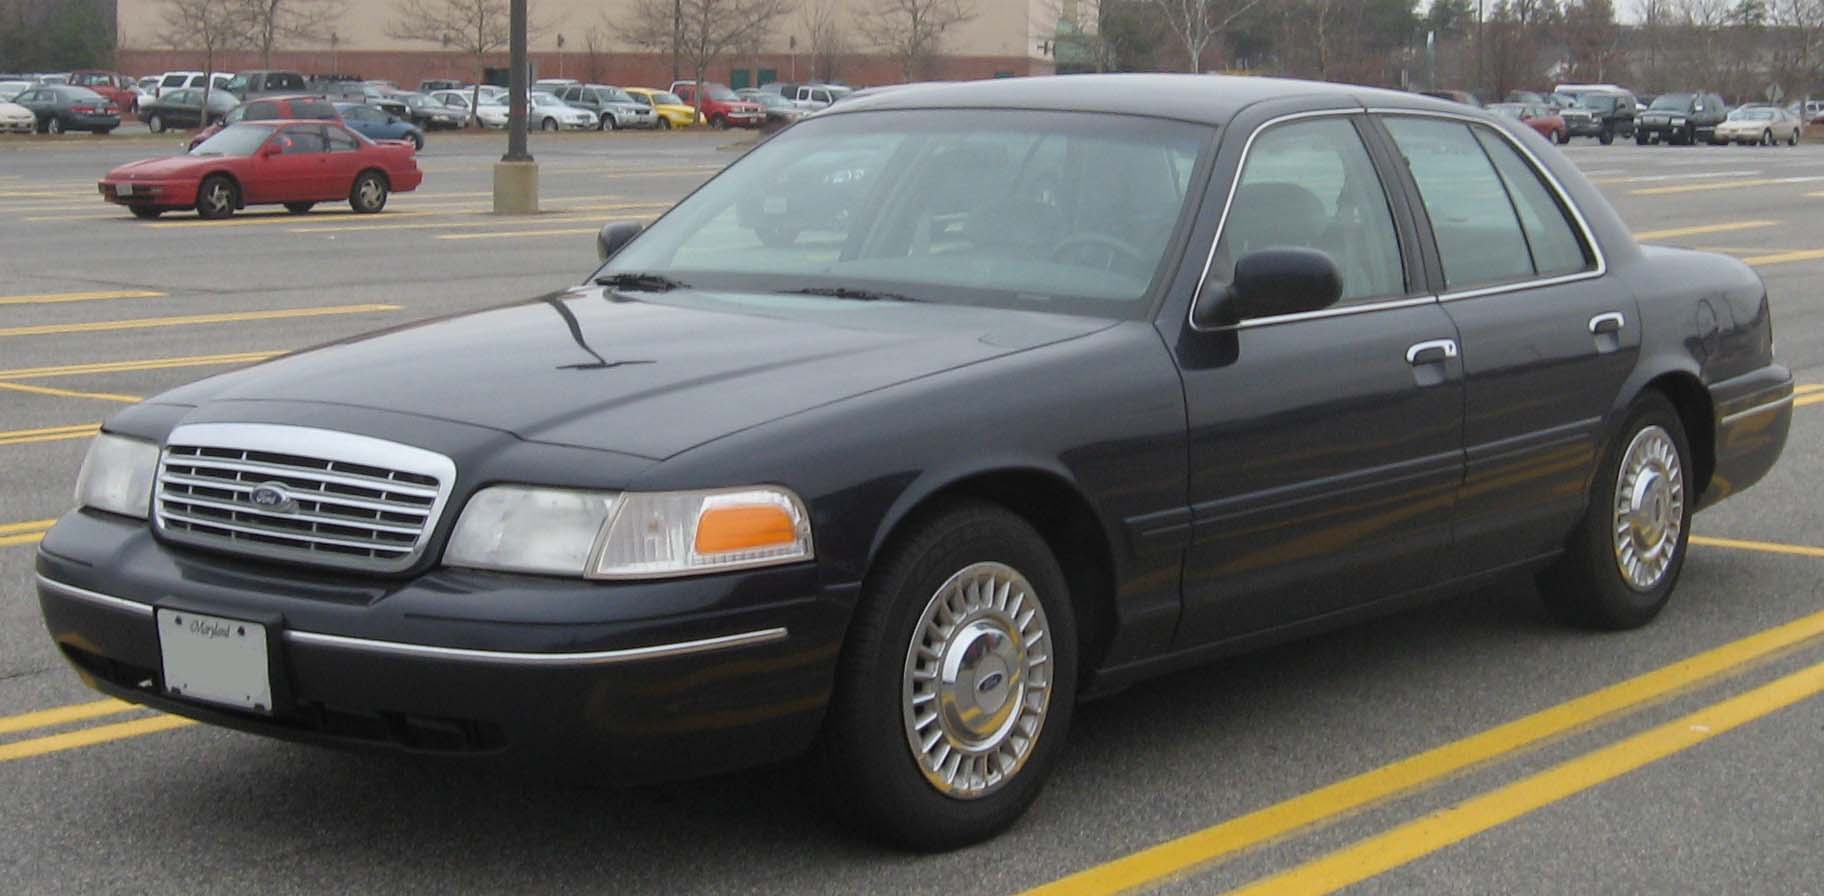 Ford Crown Victoria one of the easiest cars to work on